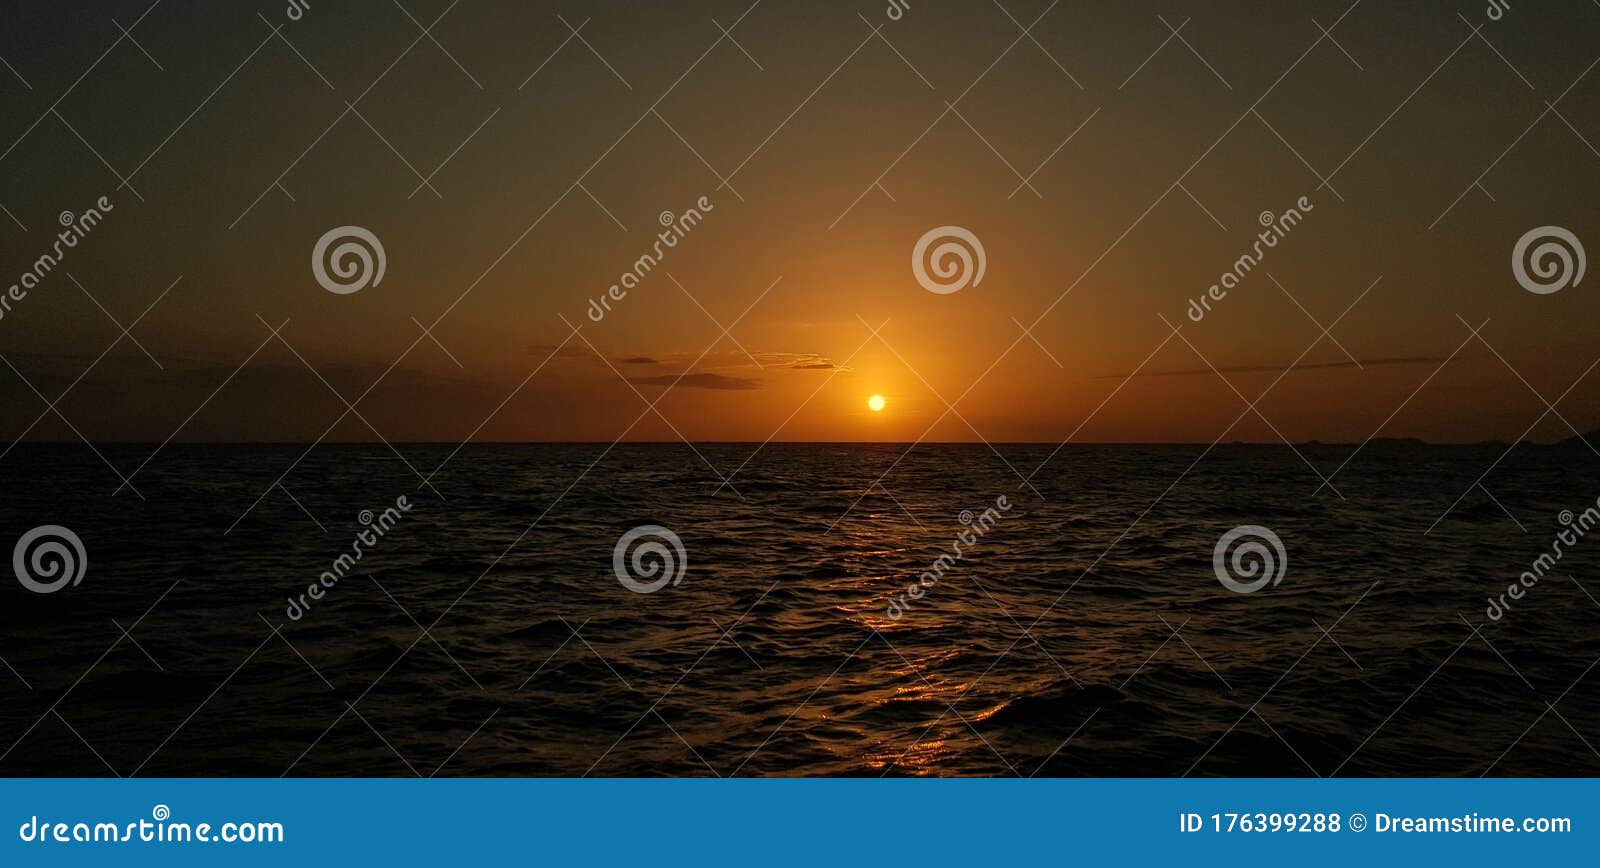 sunset in a thailand boat